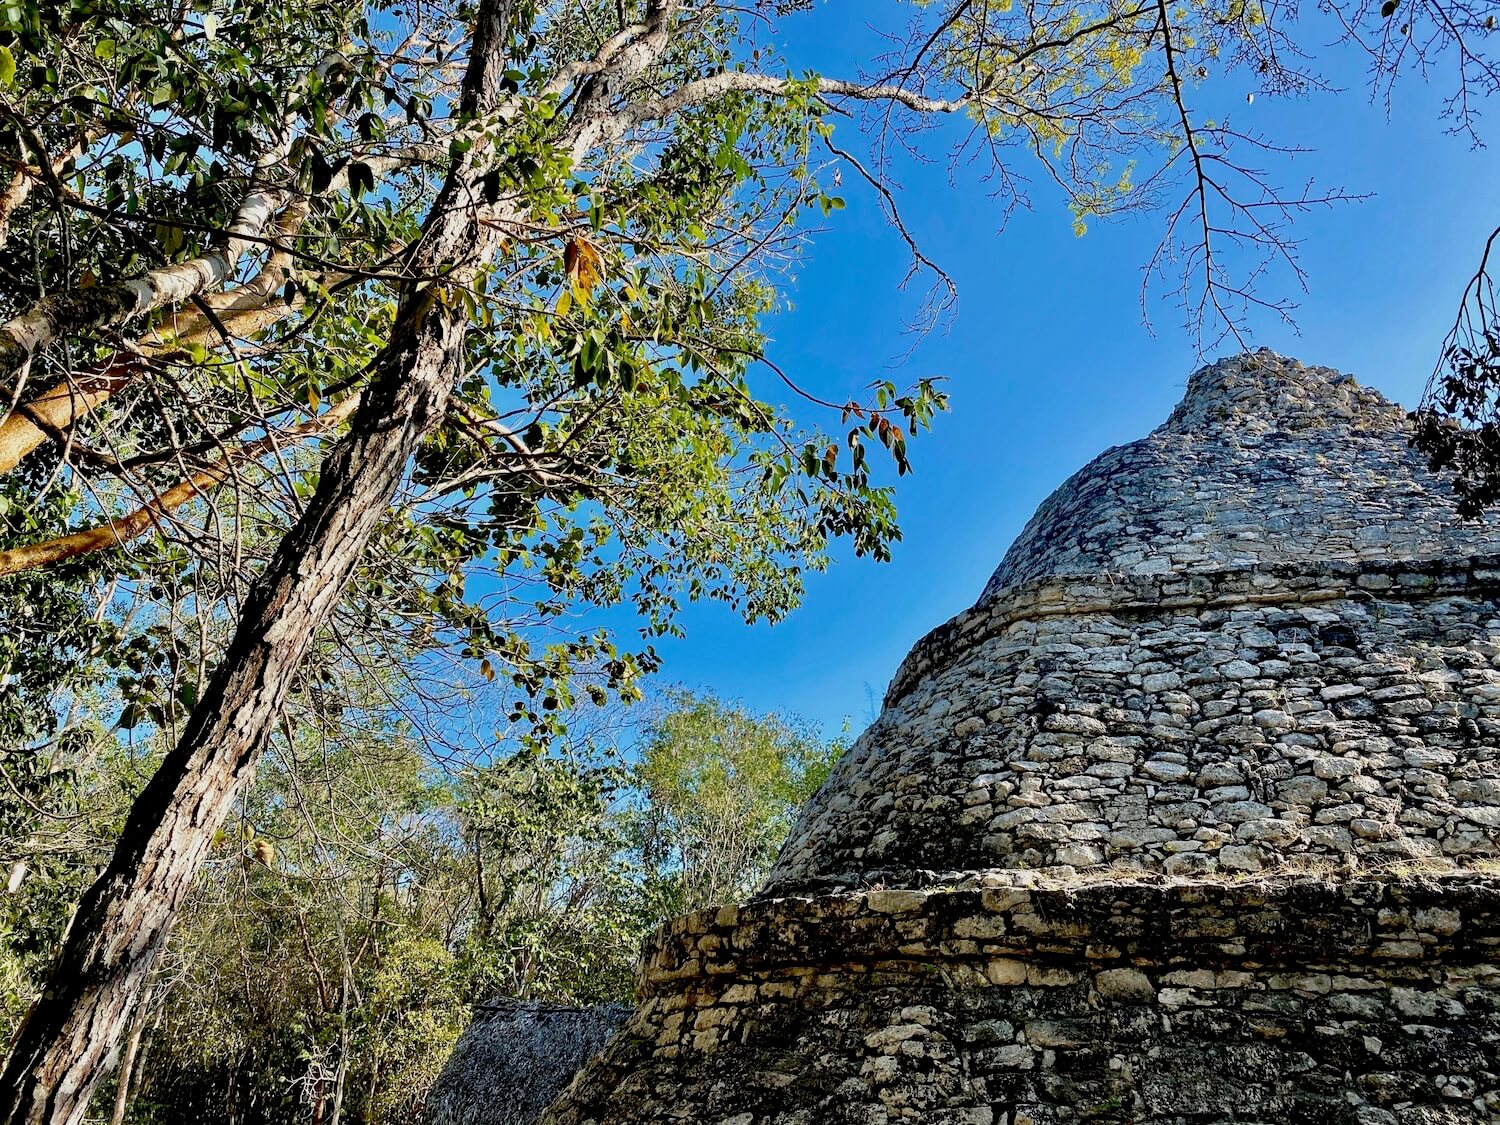 The regal and compact Xaibé is a shape not usually found in Mayan architecture.  The stones are formed of five elements or bodies with slanting walls ending in a cornice. The building is surrounded by jungle trees and blue sky in the background. 